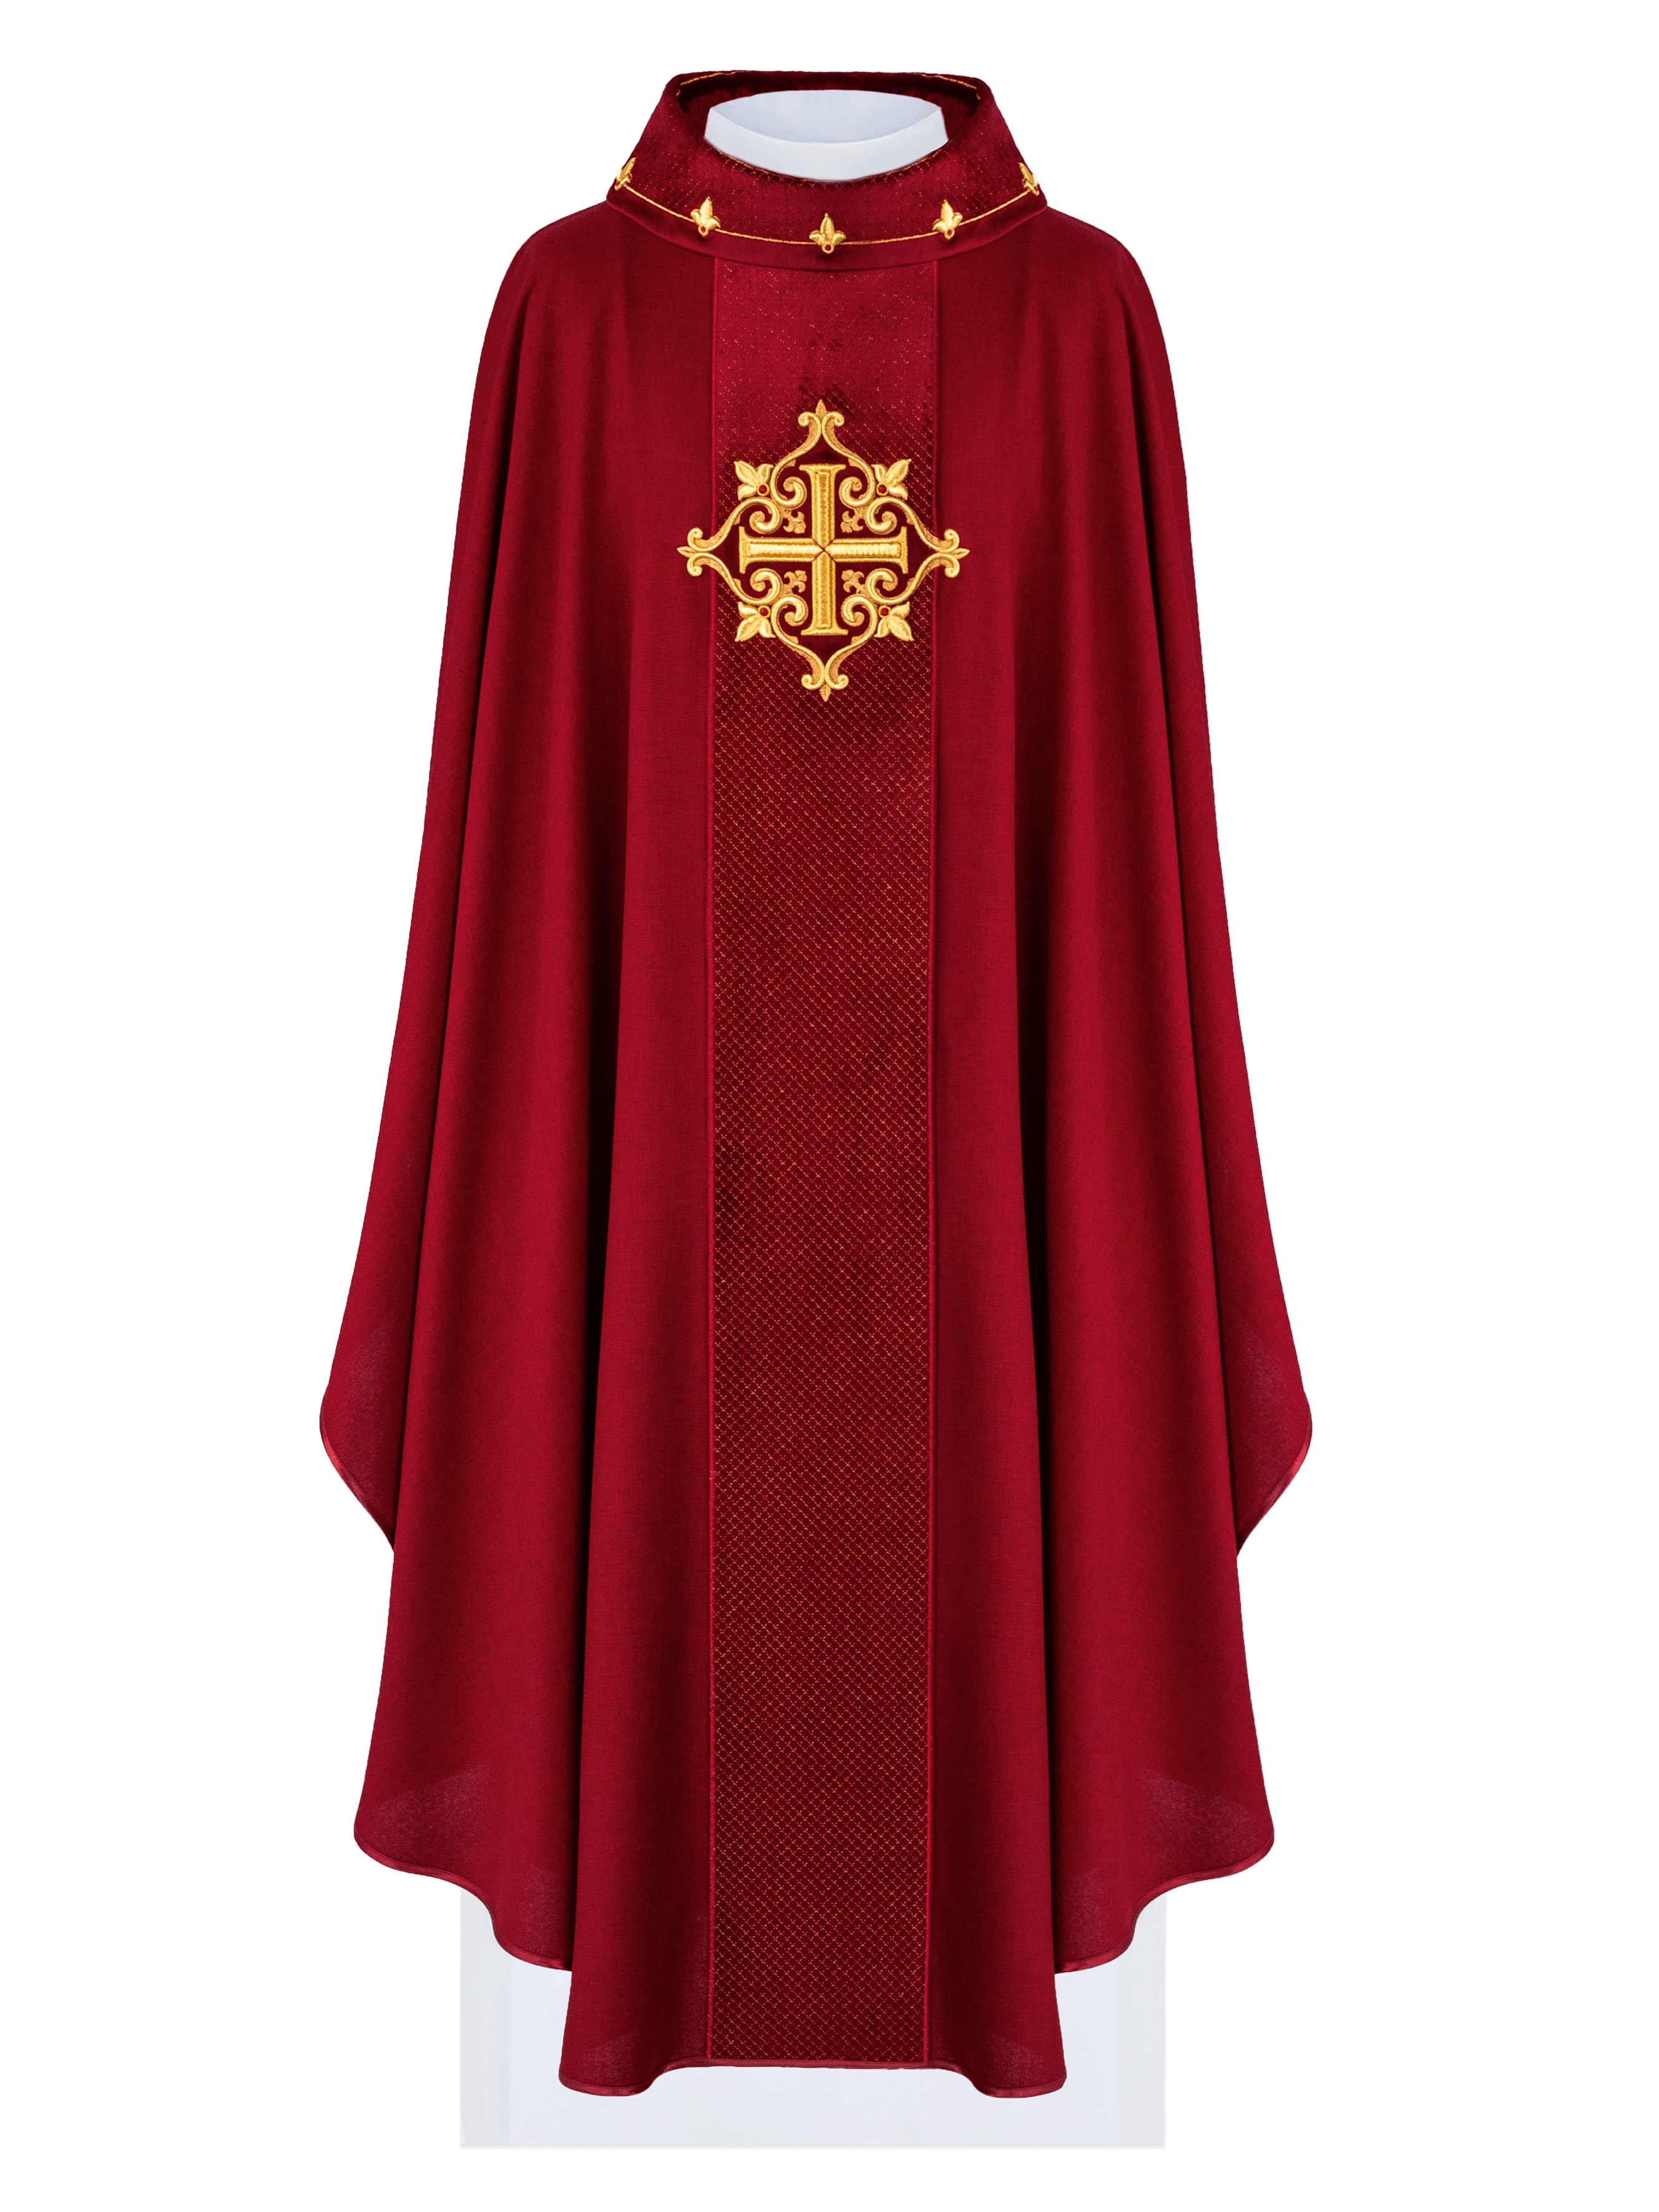 Chasuble embroidered on velvet with the symbol of the Red Cross